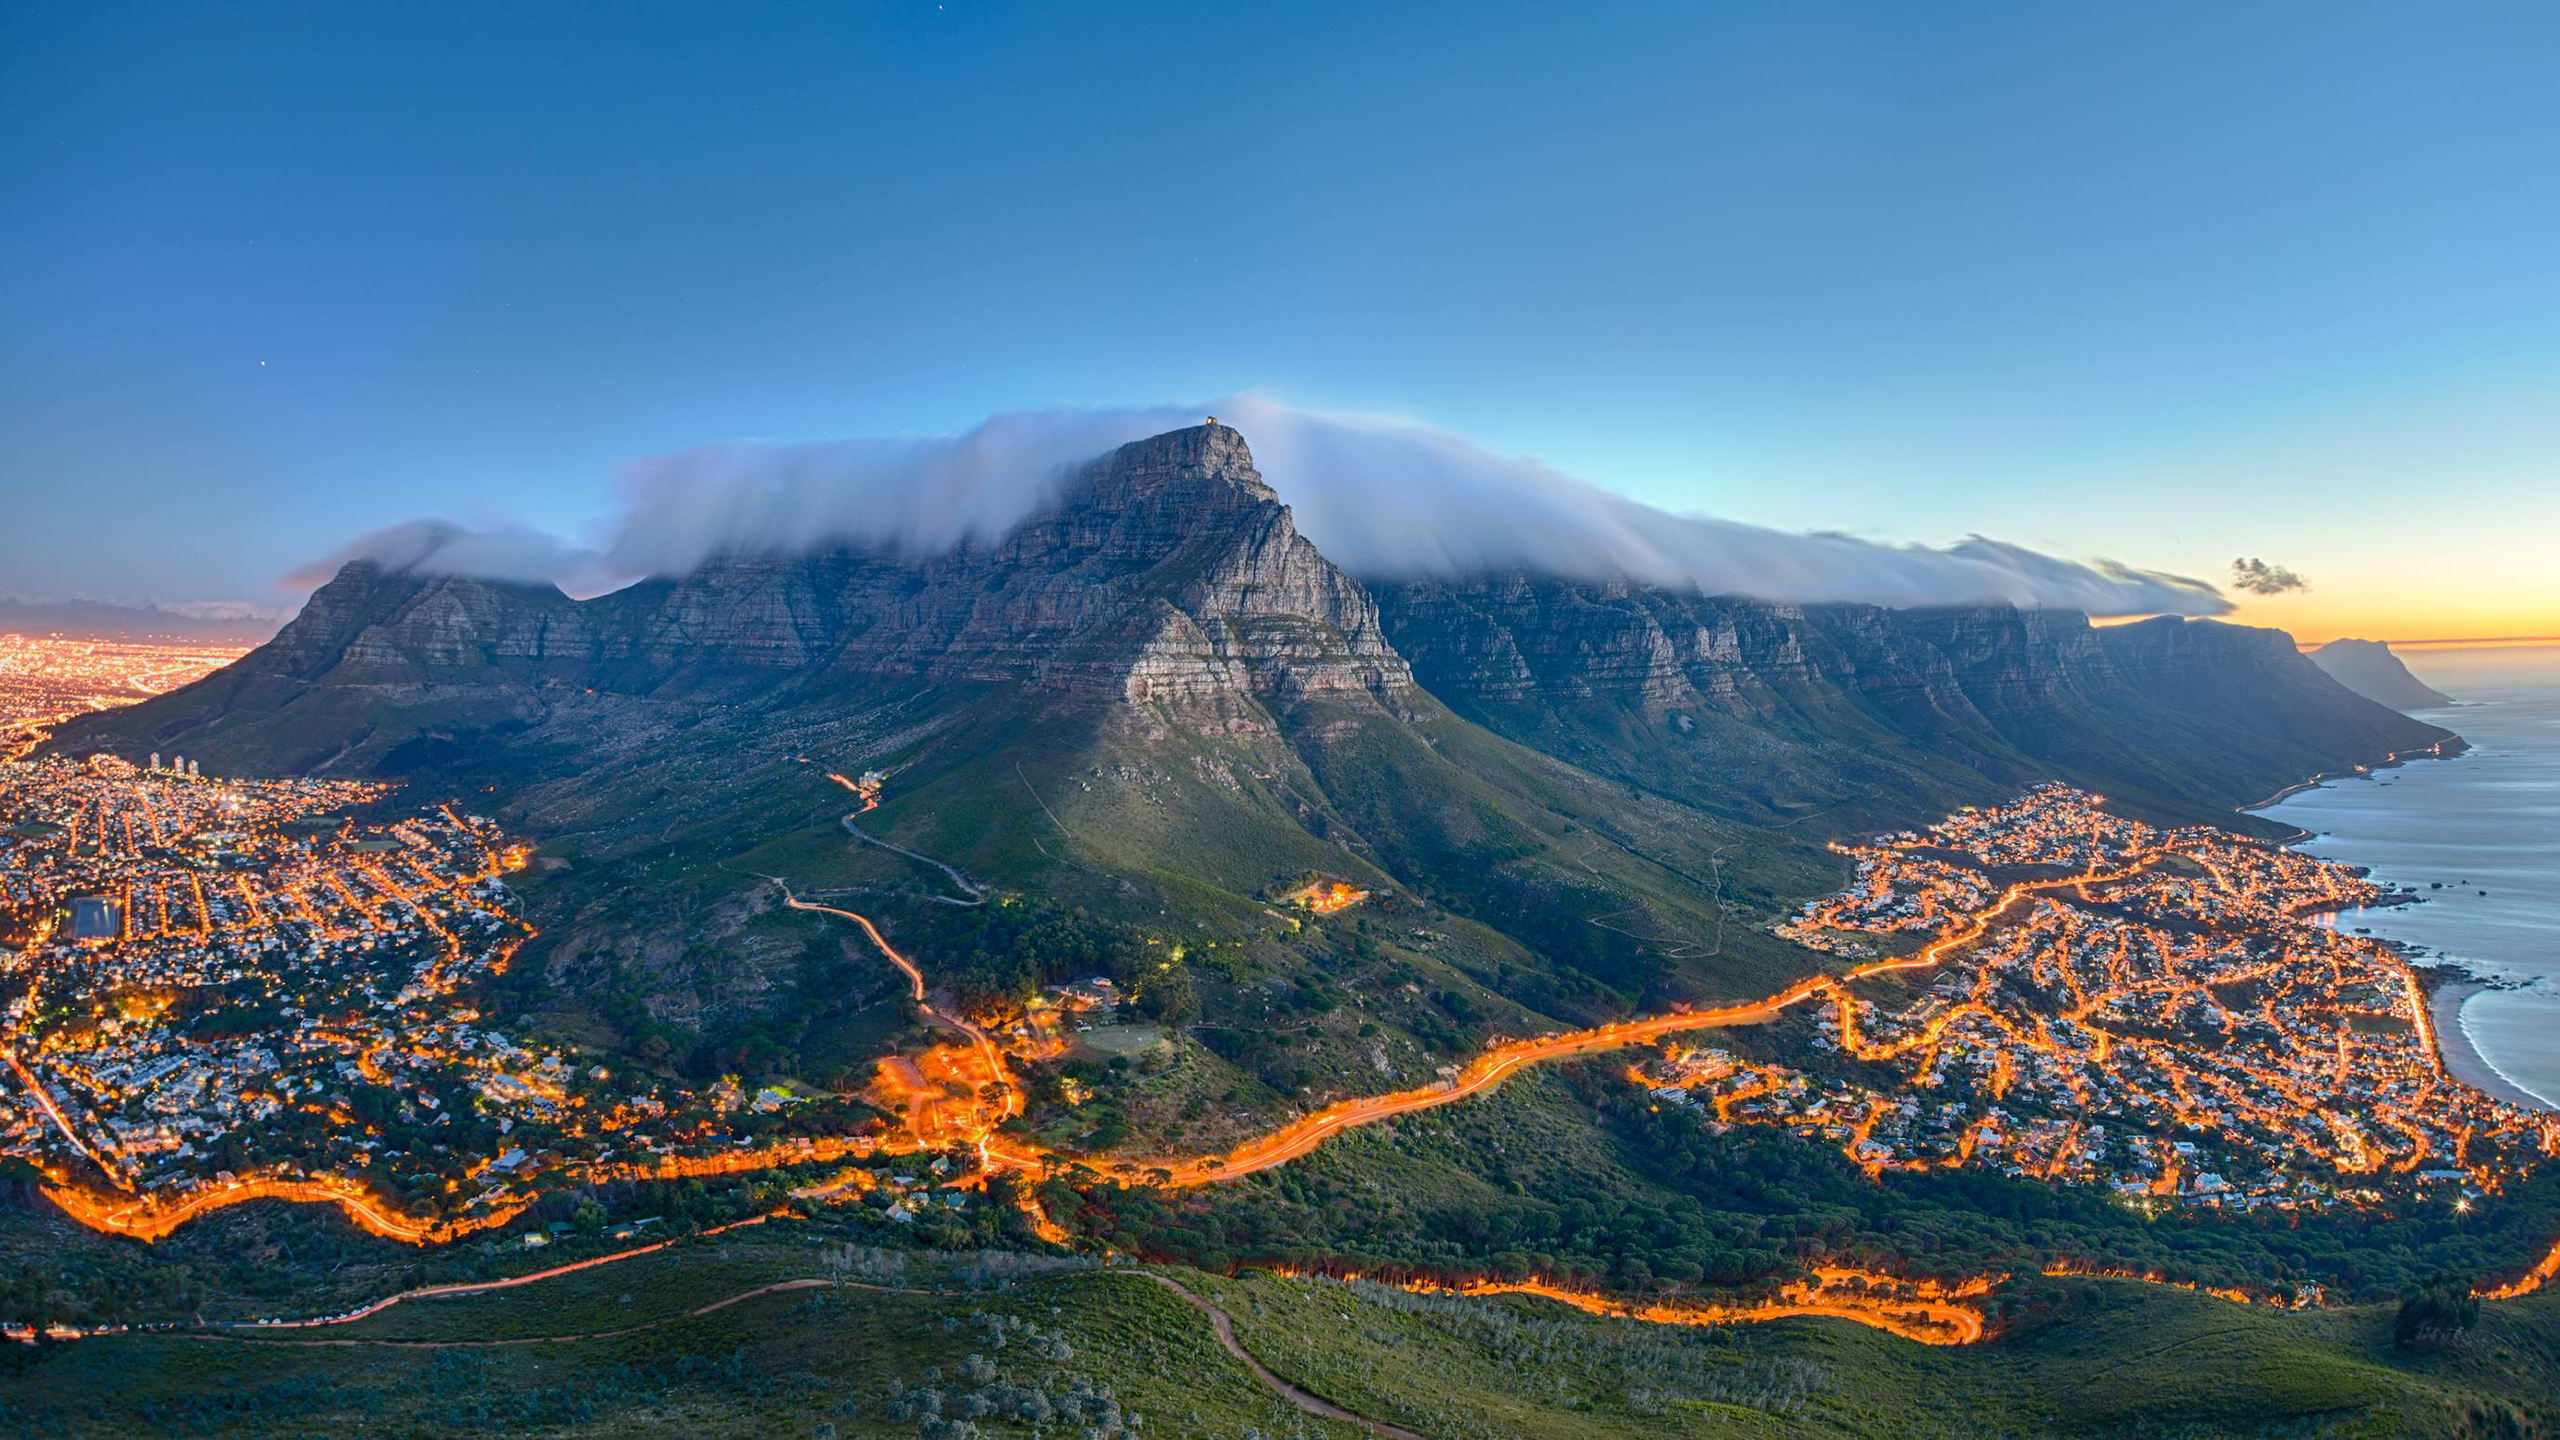 cape town, south africa, man made, city, table mountain, cities